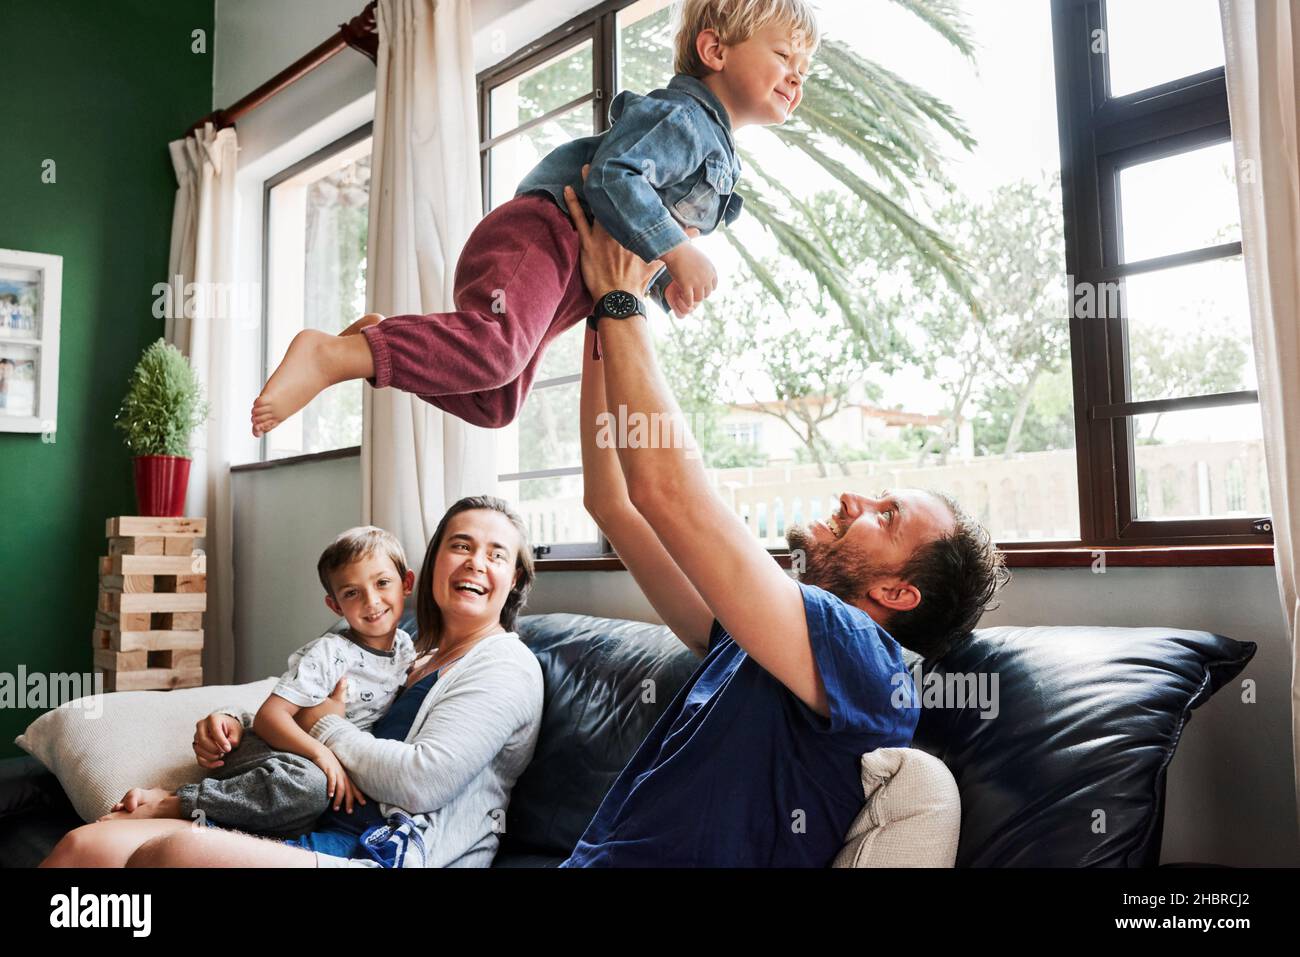 We're all in high spirits today Stock Photo